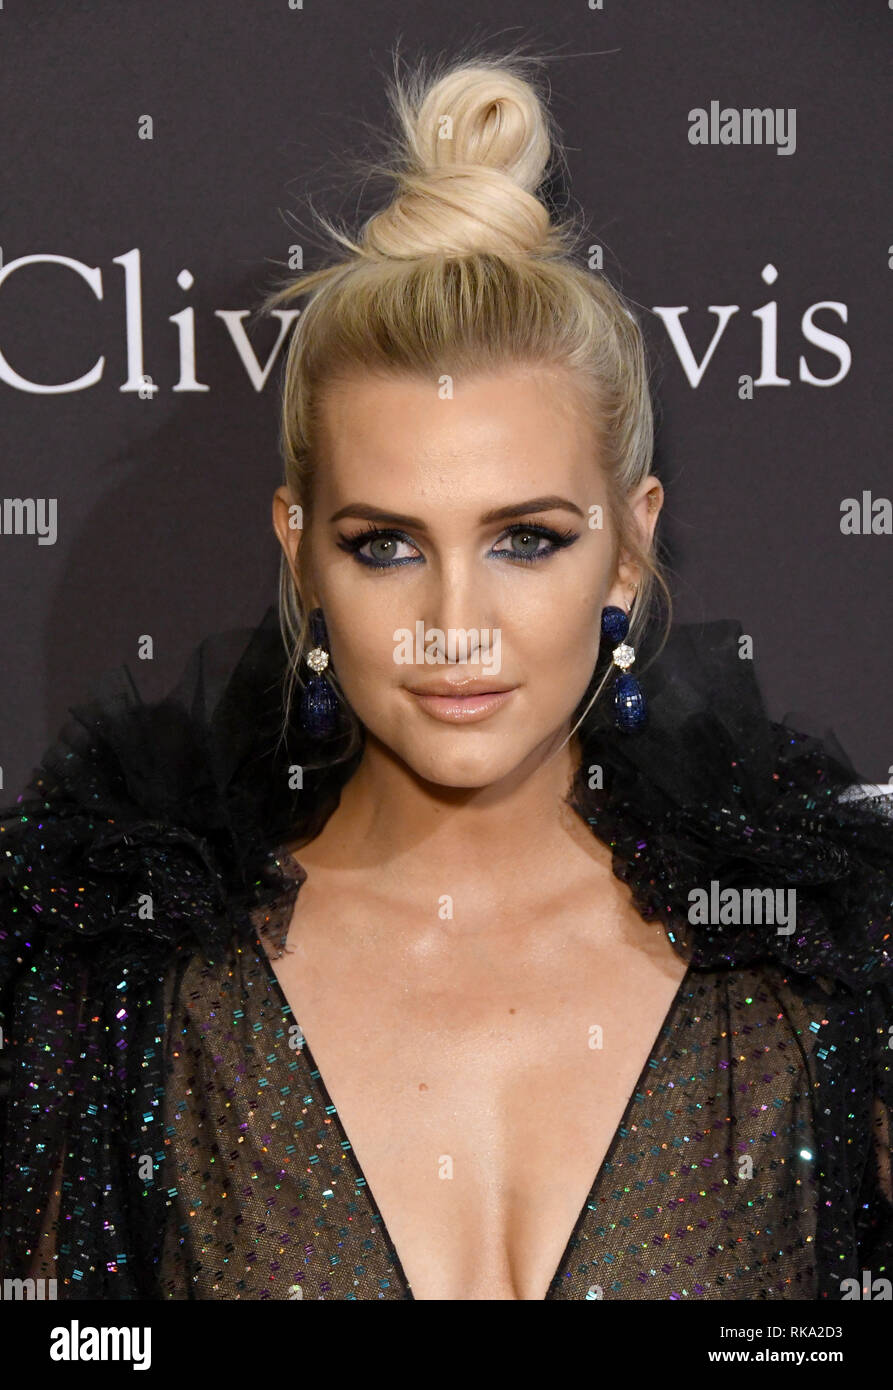 California, USA. . 9th Feb, 2019. 09 February 2019 - Beverly Hills, California - Ashlee Simpson. The Recording Academy And Clive Davis' 2019 Pre-GRAMMY Gala held at the Beverly Hilton Hotel. Photo Credit: Birdie Thompson/AdMedia Credit: Birdie Thompson/AdMedia/ZUMA Wire/Alamy Live News Stock Photo